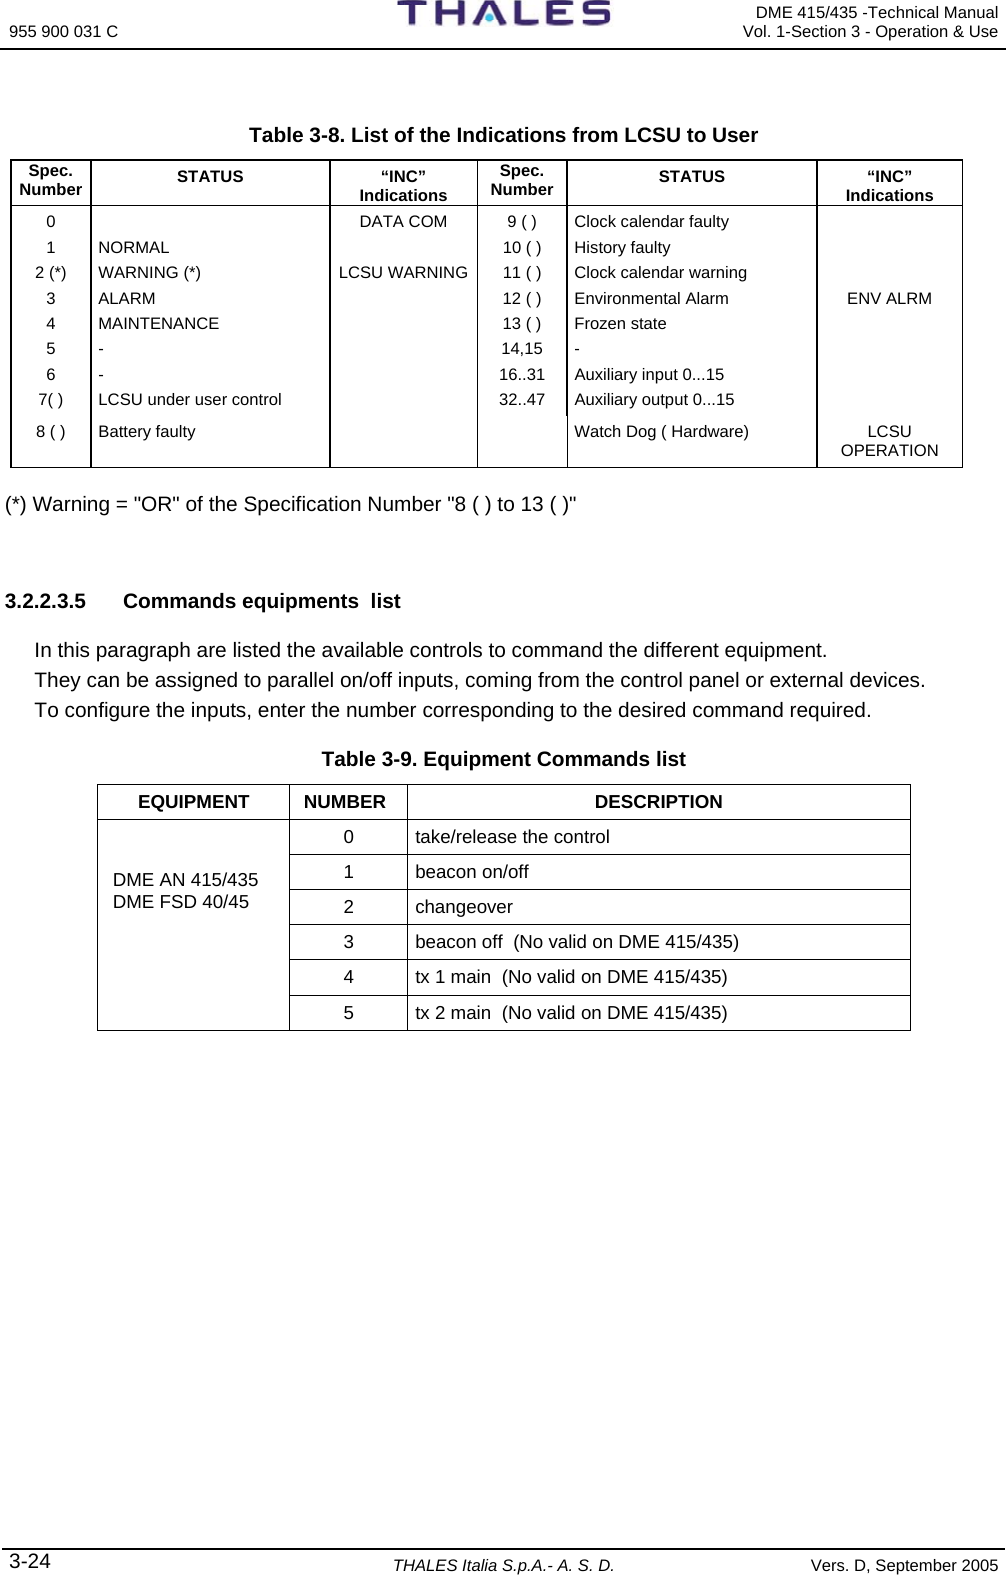 955 900 031 C   DME 415/435 -Technical Manual Vol. 1-Section 3 - Operation &amp; Use 3-24 THALES Italia S.p.A.- A. S. D. Vers. D, September 2005  Table 3-8. List of the Indications from LCSU to User Spec. Number STATUS “INC”  Indications Spec. Number STATUS “INC”  Indications 0    DATA COM  9 ( )  Clock calendar faulty   1  NORMAL    10 ( )  History faulty   2 (*)  WARNING (*)  LCSU WARNING 11 ( )  Clock calendar warning   3  ALARM    12 ( )   Environmental Alarm  ENV ALRM 4  MAINTENANCE    13 ( )  Frozen state   5 -    14,15 -   6  -    16..31  Auxiliary input 0...15   7( )  LCSU under user control    32..47  Auxiliary output 0...15   8 ( )  Battery faulty      Watch Dog ( Hardware)  LCSU OPERATION  (*) Warning = &quot;OR&quot; of the Specification Number &quot;8 ( ) to 13 ( )&quot;   3.2.2.3.5  Commands equipments  list In this paragraph are listed the available controls to command the different equipment.  They can be assigned to parallel on/off inputs, coming from the control panel or external devices. To configure the inputs, enter the number corresponding to the desired command required. Table 3-9. Equipment Commands list EQUIPMENT NUMBER  DESCRIPTION 0  take/release the control 1 beacon on/off 2 changeover 3  beacon off  (No valid on DME 415/435) 4  tx 1 main  (No valid on DME 415/435)   DME AN 415/435 DME FSD 40/45  5  tx 2 main  (No valid on DME 415/435)  